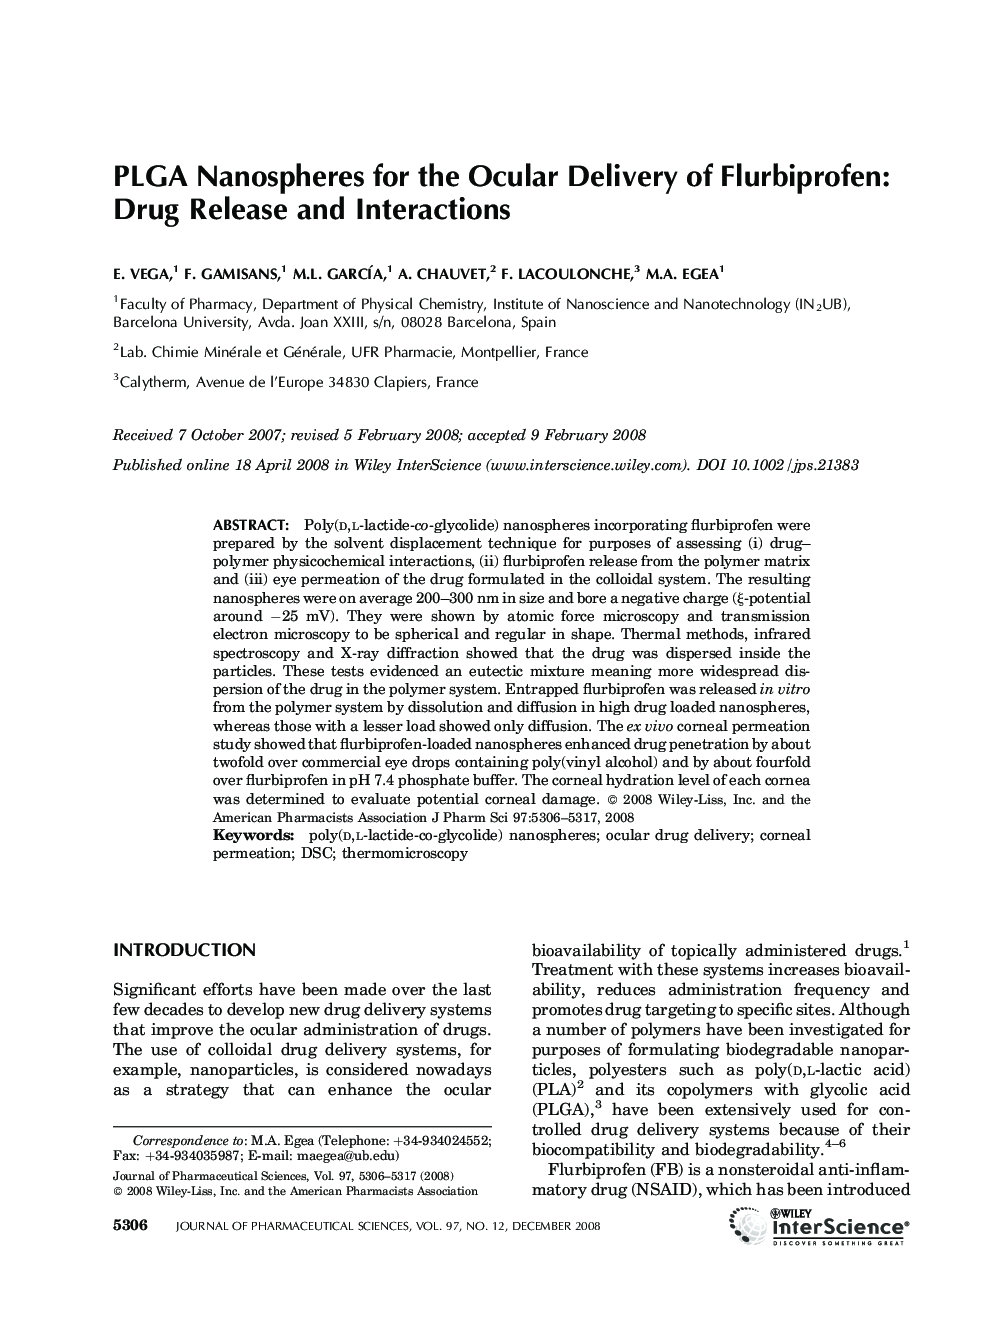 PLGA nanospheres for the ocular delivery of flurbiprofen: Drug release and interactions